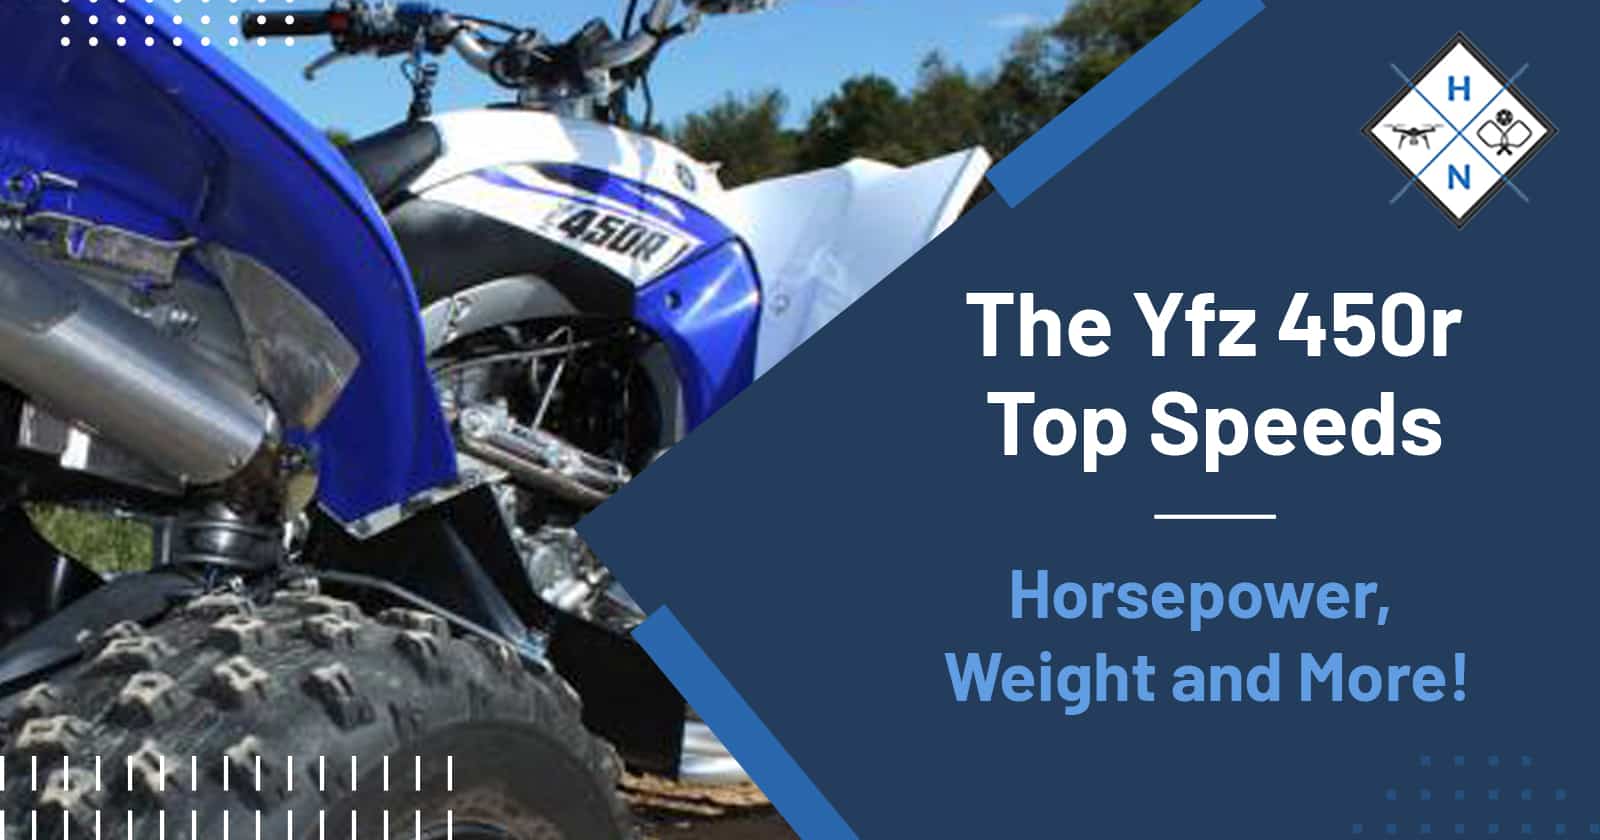 The Yfz 450r: Top Speeds, Horsepower, Weight, and More!